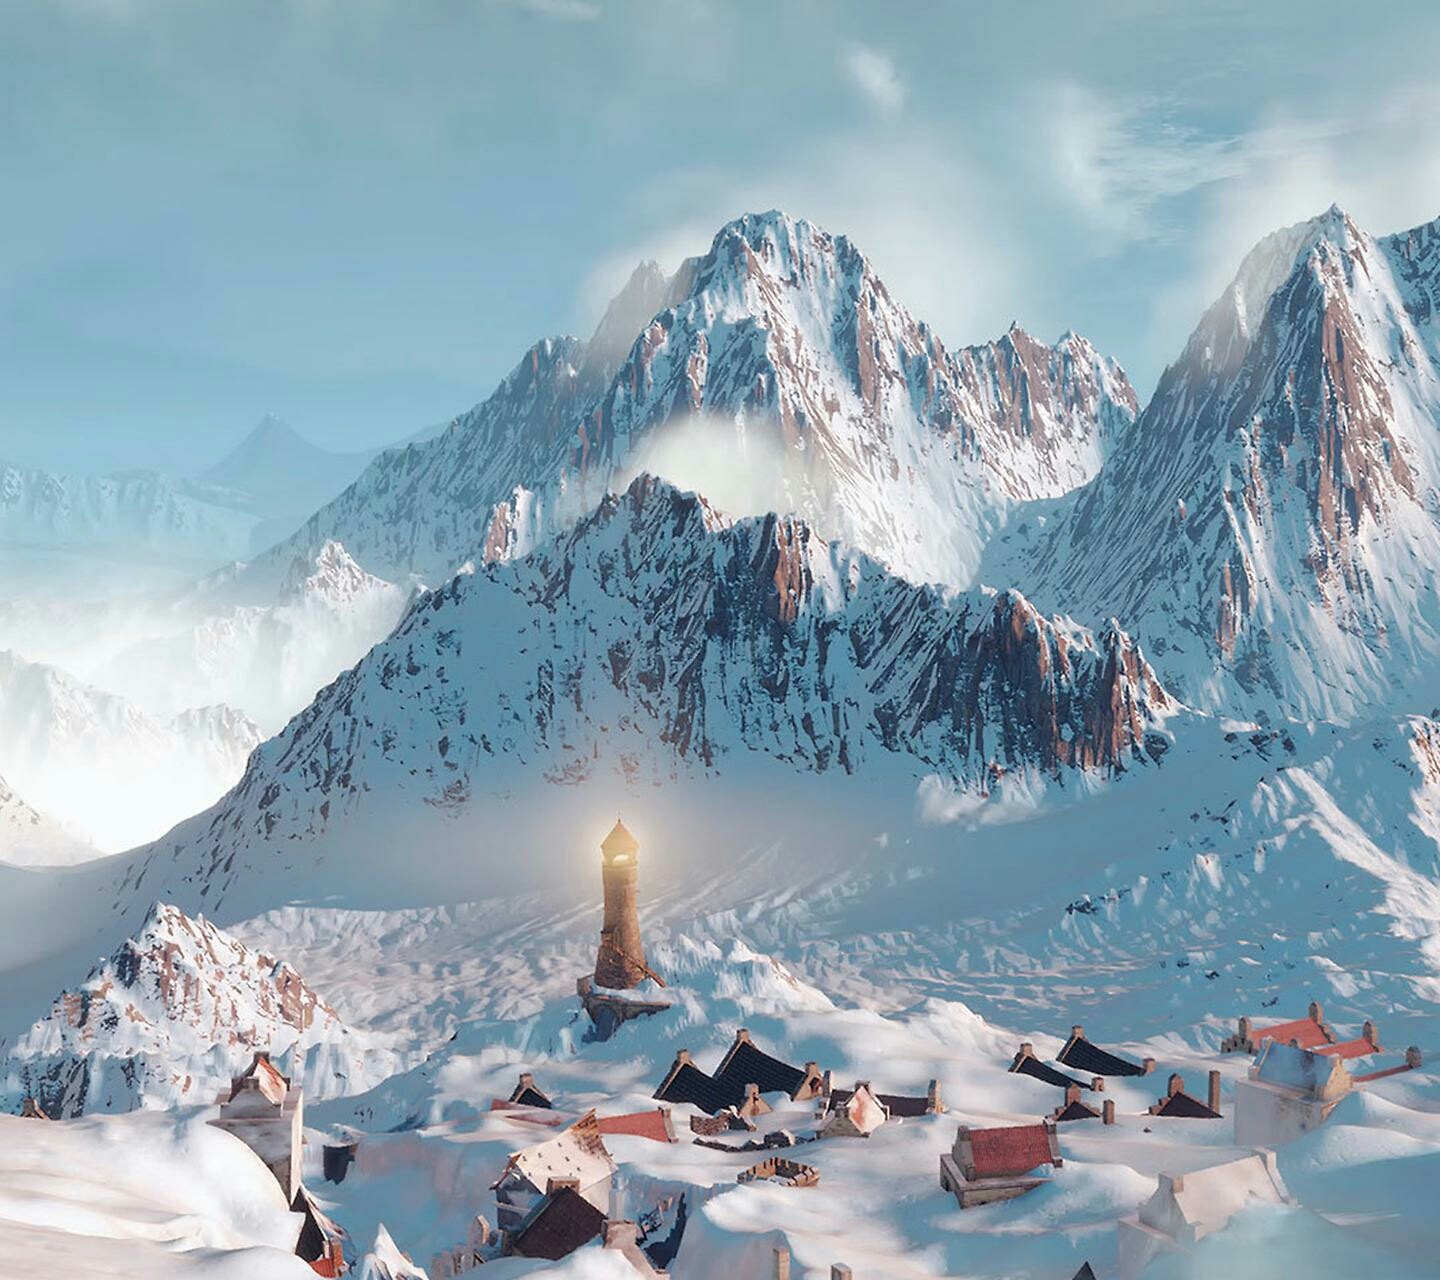 General 1440x1280 mountains snow digital art The Witcher 3: Wild Hunt video game landscape video games PC gaming screen shot snowy peak RPG